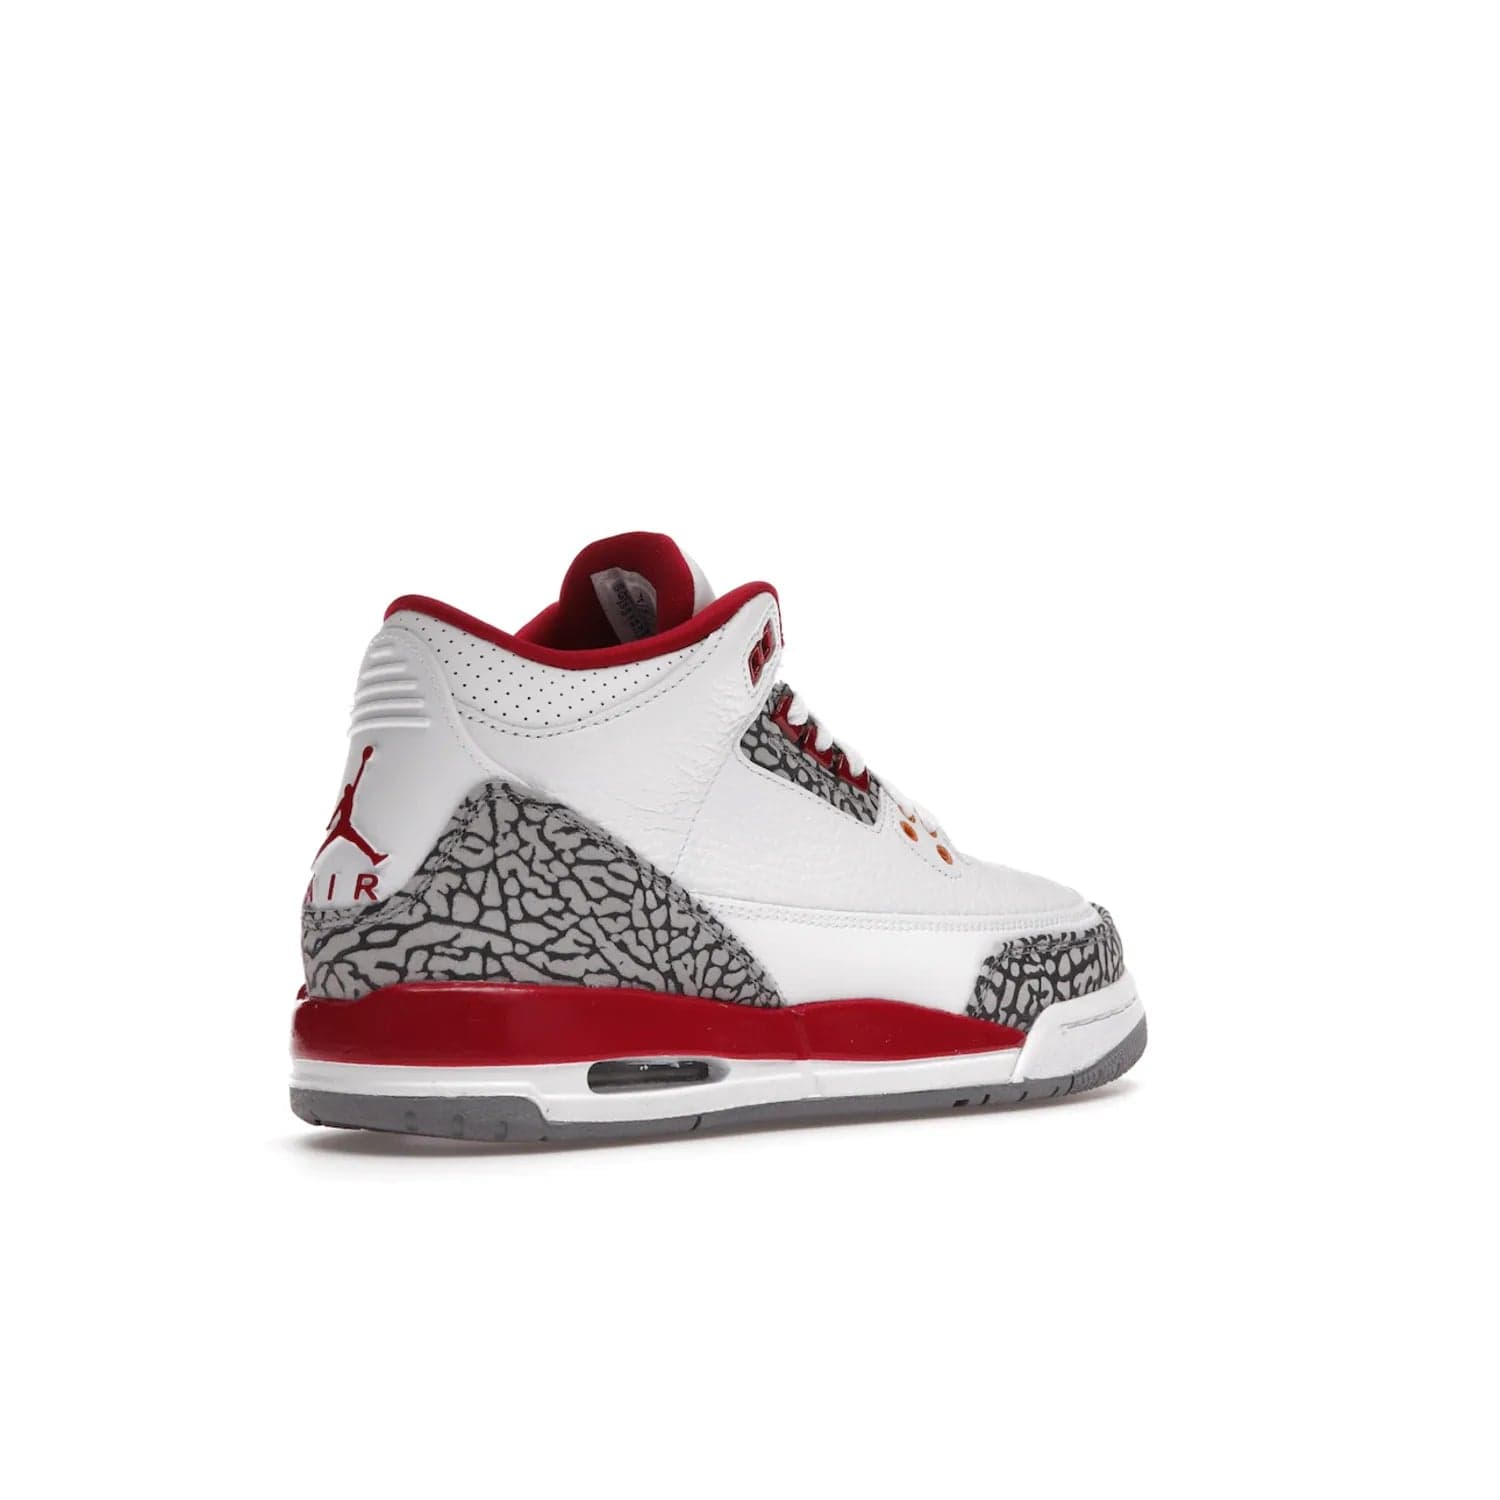 Jordan 3 Retro Cardinal (GS) - Image 33 - Only at www.BallersClubKickz.com - Shop the kid-sized Air Jordan 3 Retro Cardinal GS, released Feb 2022. White tumbled leather upper, light curry accenting, cement grey and classic red details throughout. Visible Air cushioning, midsole, and an eye-catching outsole. Show off your style with this fashionable streetwear silhouette.